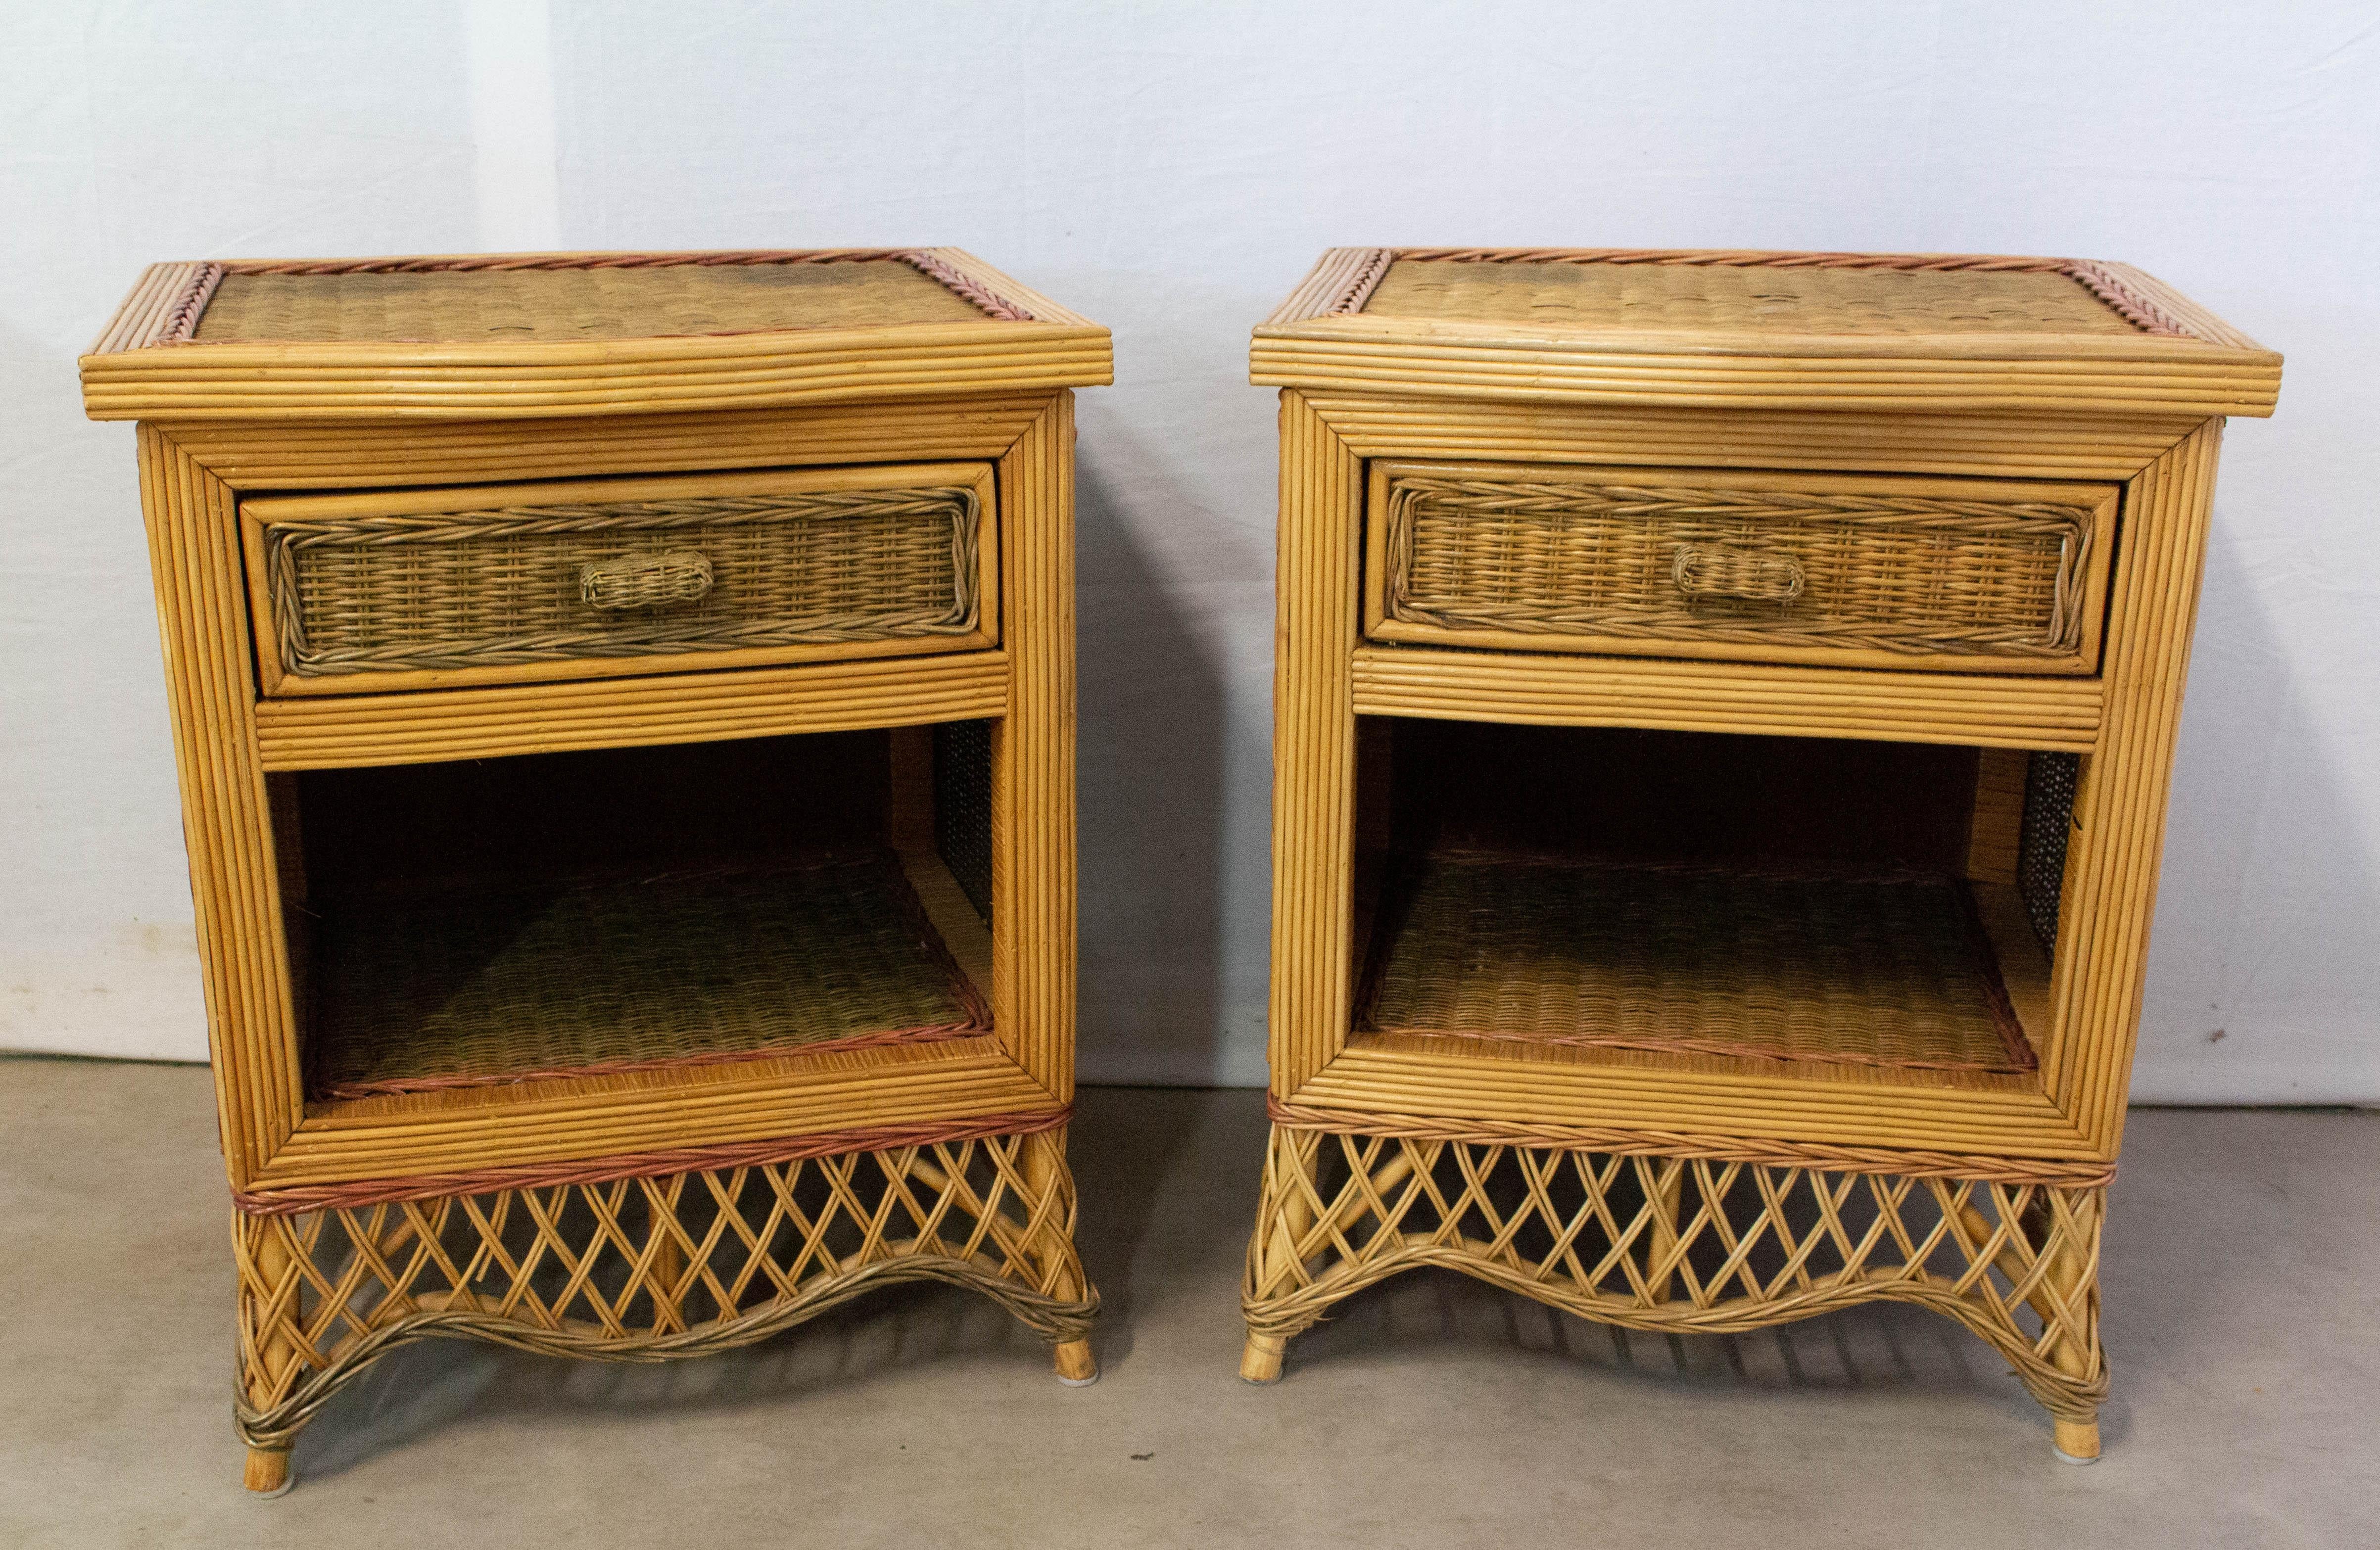 Pair of French side cabinet late 20th Century
Multicolored Rattan nightstands bedside tables 
Very good condition with only very minor marks of use for their age.

For shipping :
1 pack : 45x53x90cm 21kg